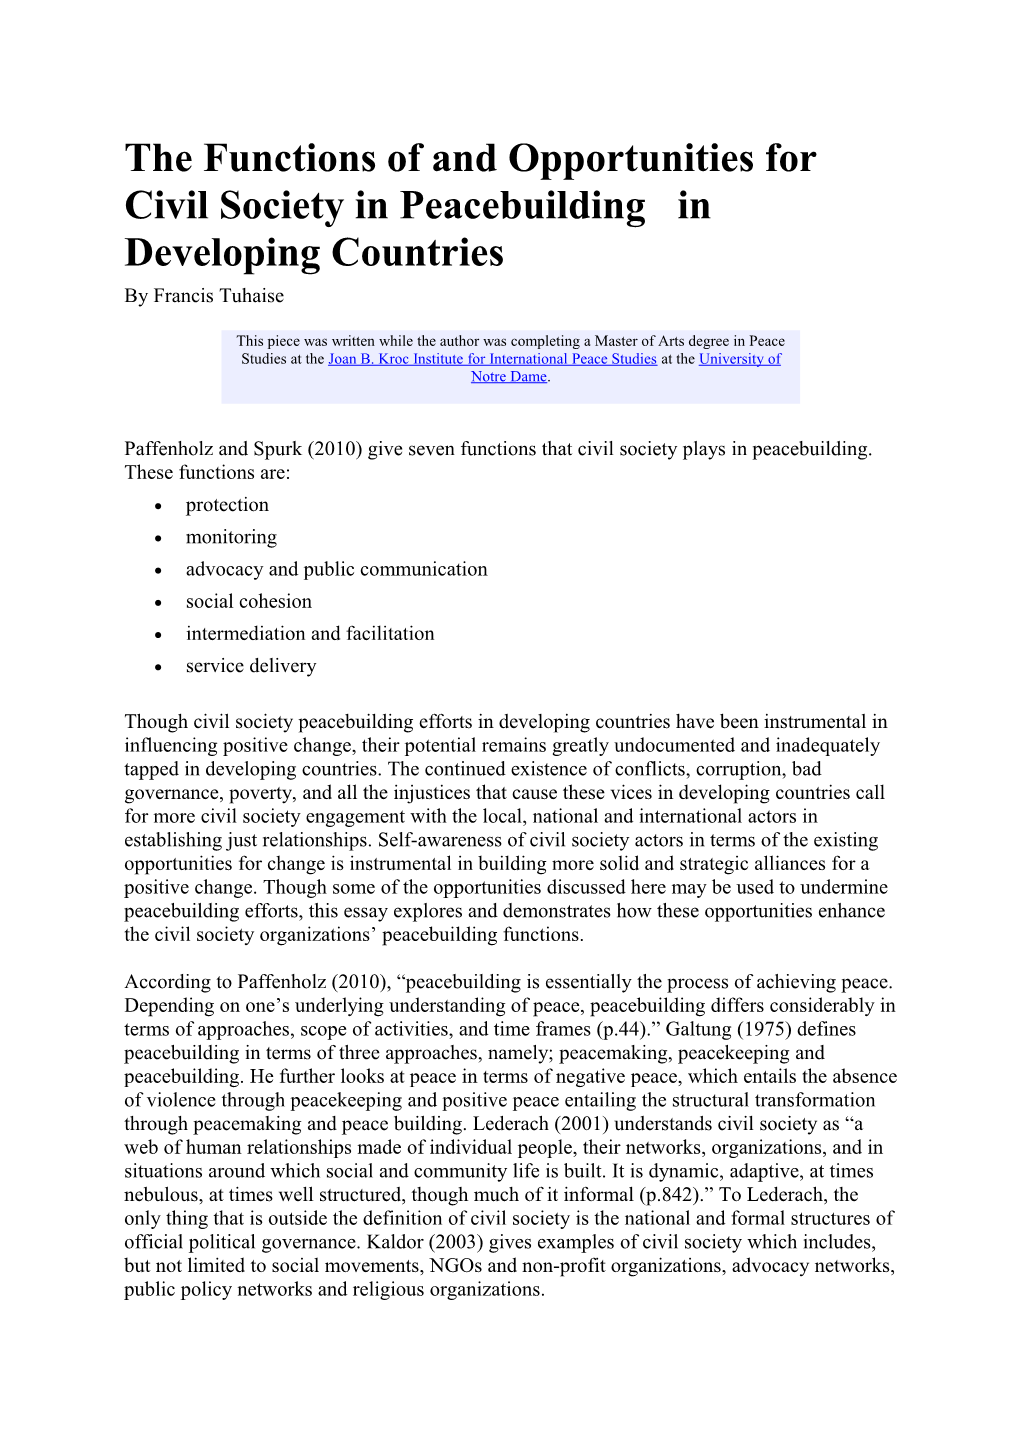 The Functions of and Opportunities for Civil Society in Peacebuilding in Developing Countries